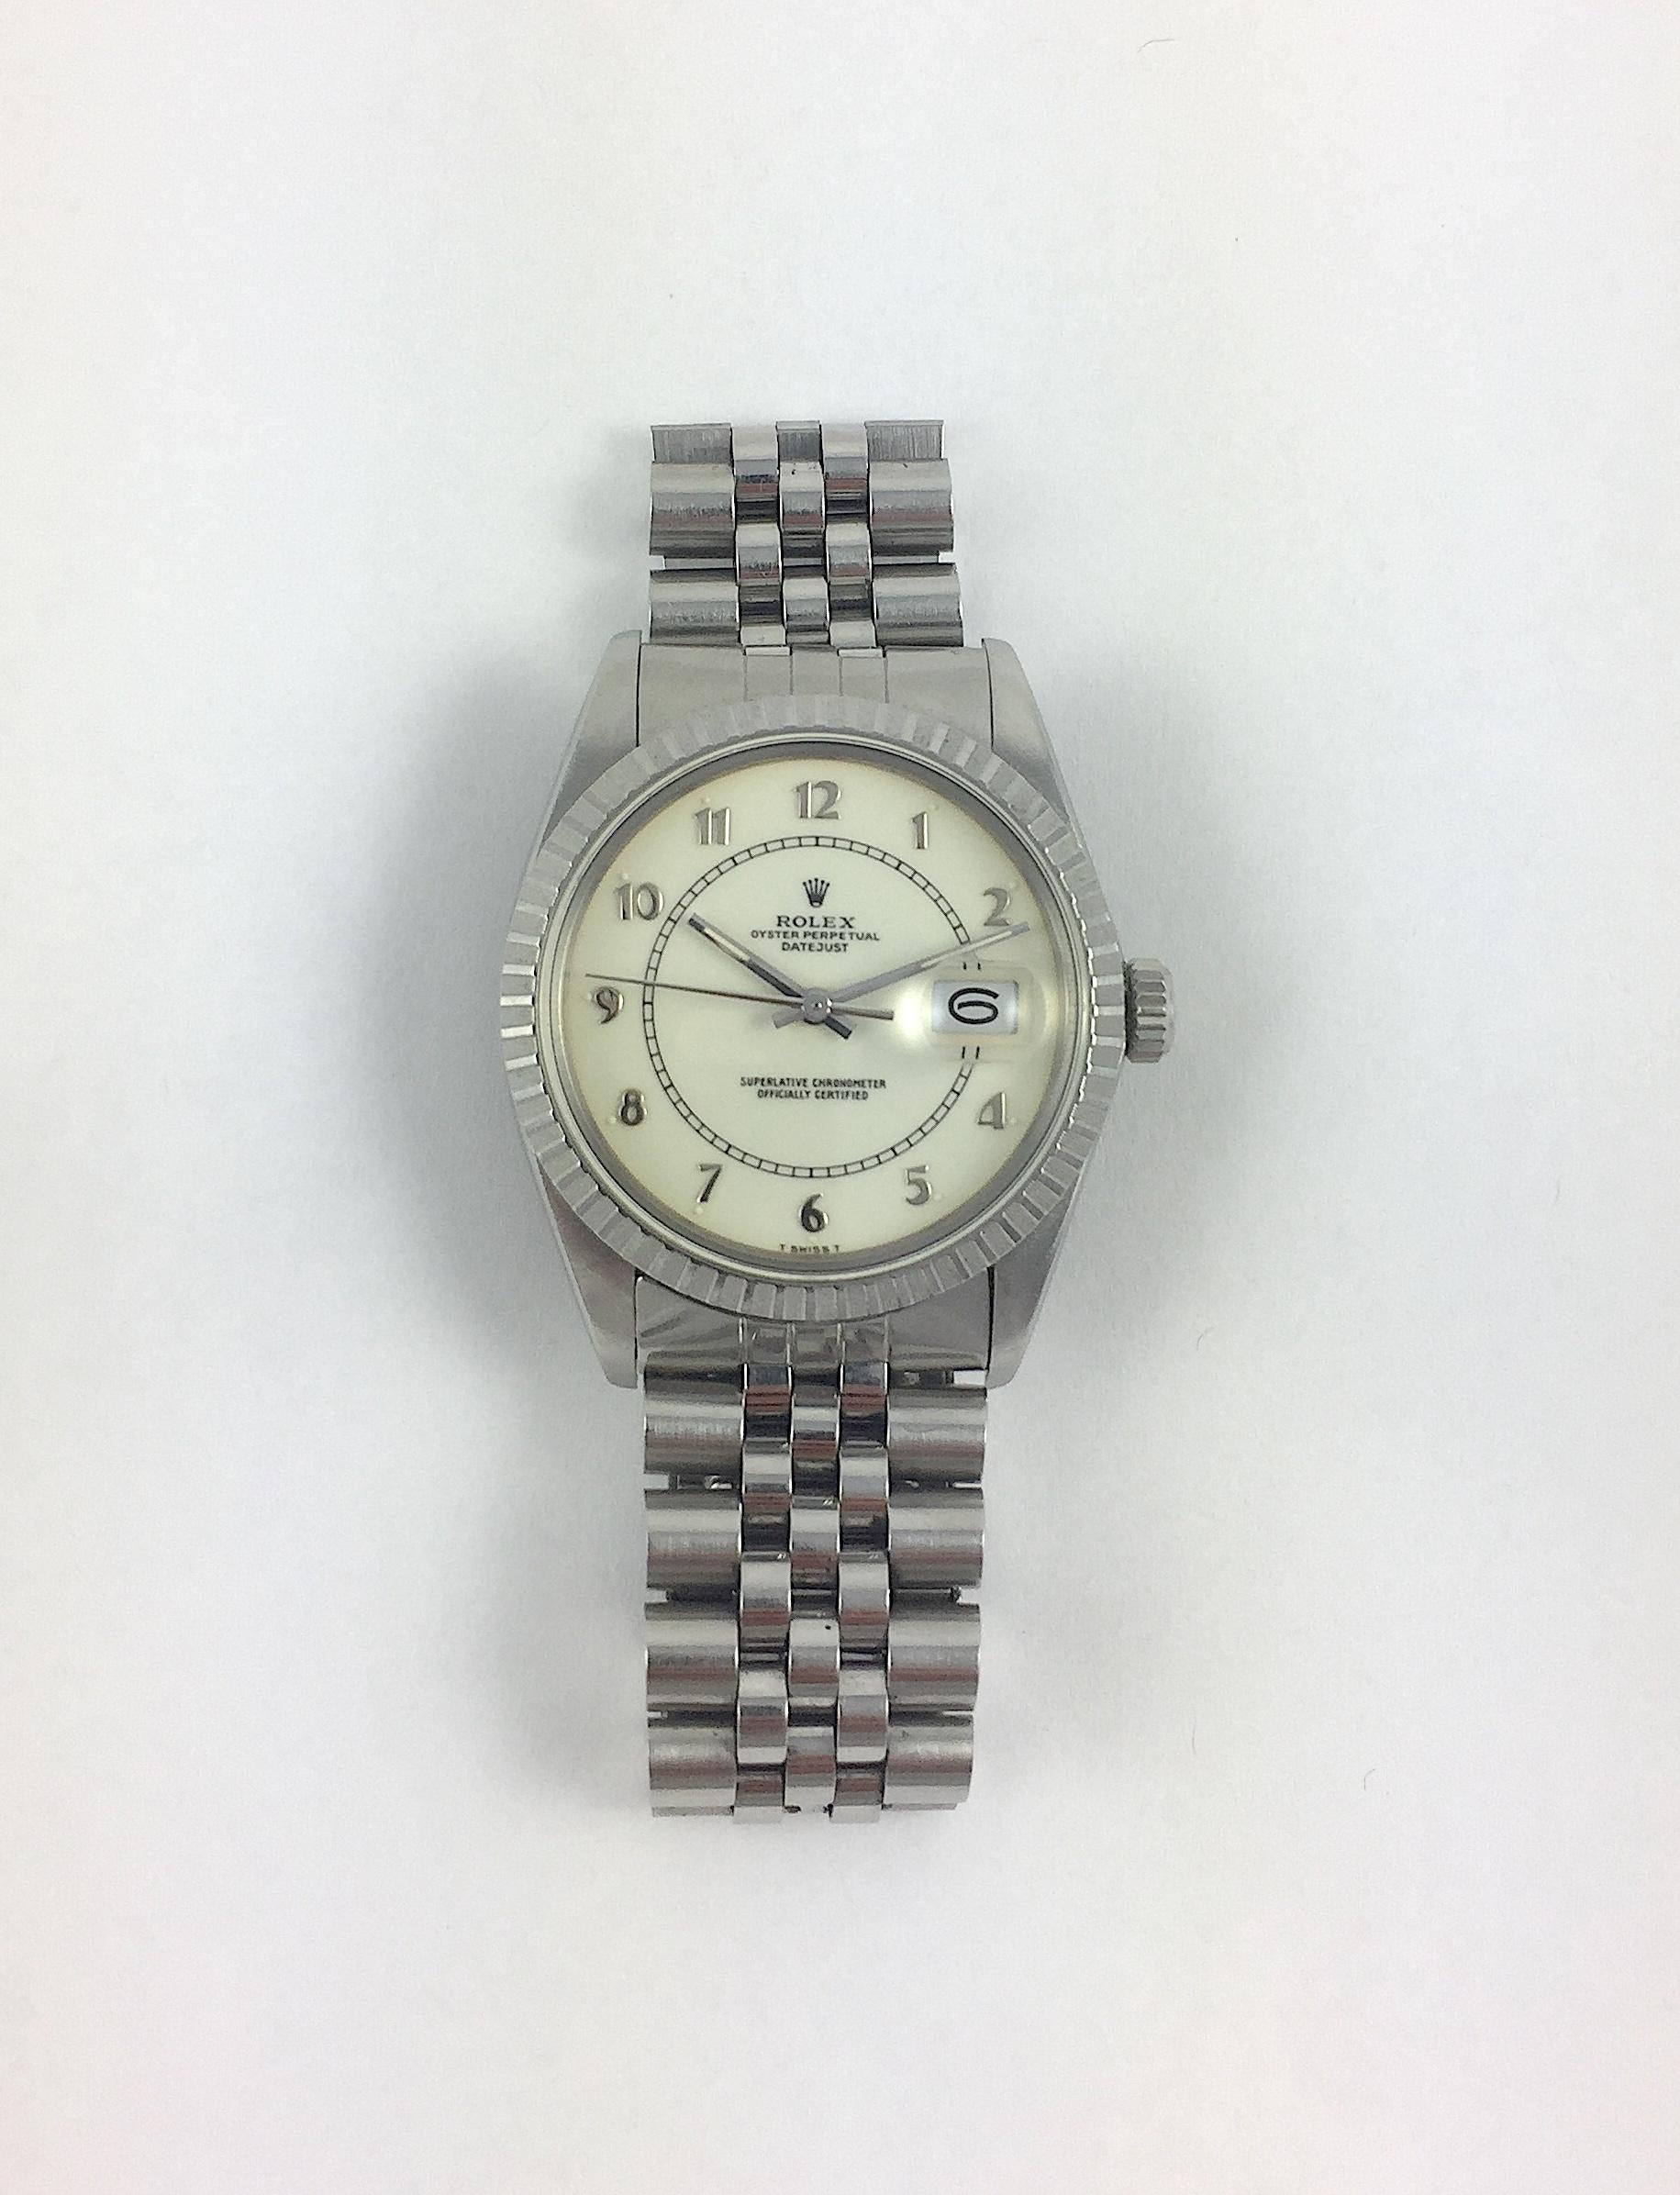 Rolex Stainless Steel and White Gold Oyster Perpetual Datejust Watch
Extremely Rare Eggshell Enamel Boiler Gauge Dial with Arabic Numerals
White Gold Gold Fluted Bezel
Stainless Steel Case
36mm in size 
Features Rolex Automatic Movement with Calibre